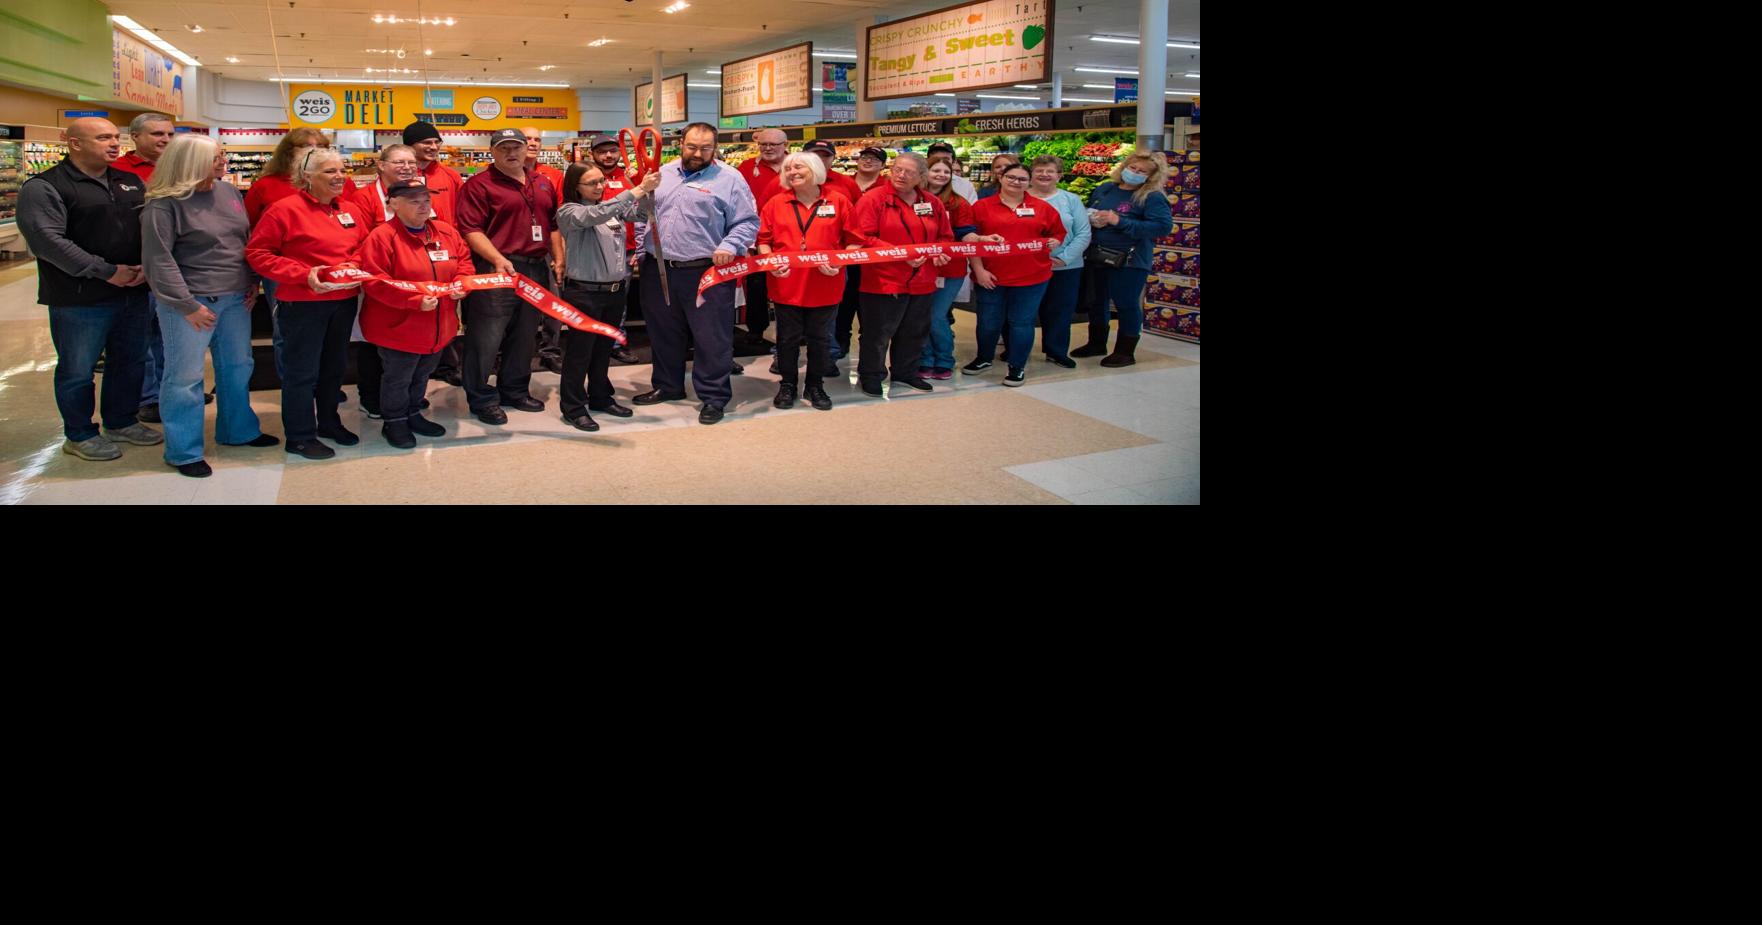 WEIS MARKETS COMPLETES REMODEL OF MILLERSBURG STORE